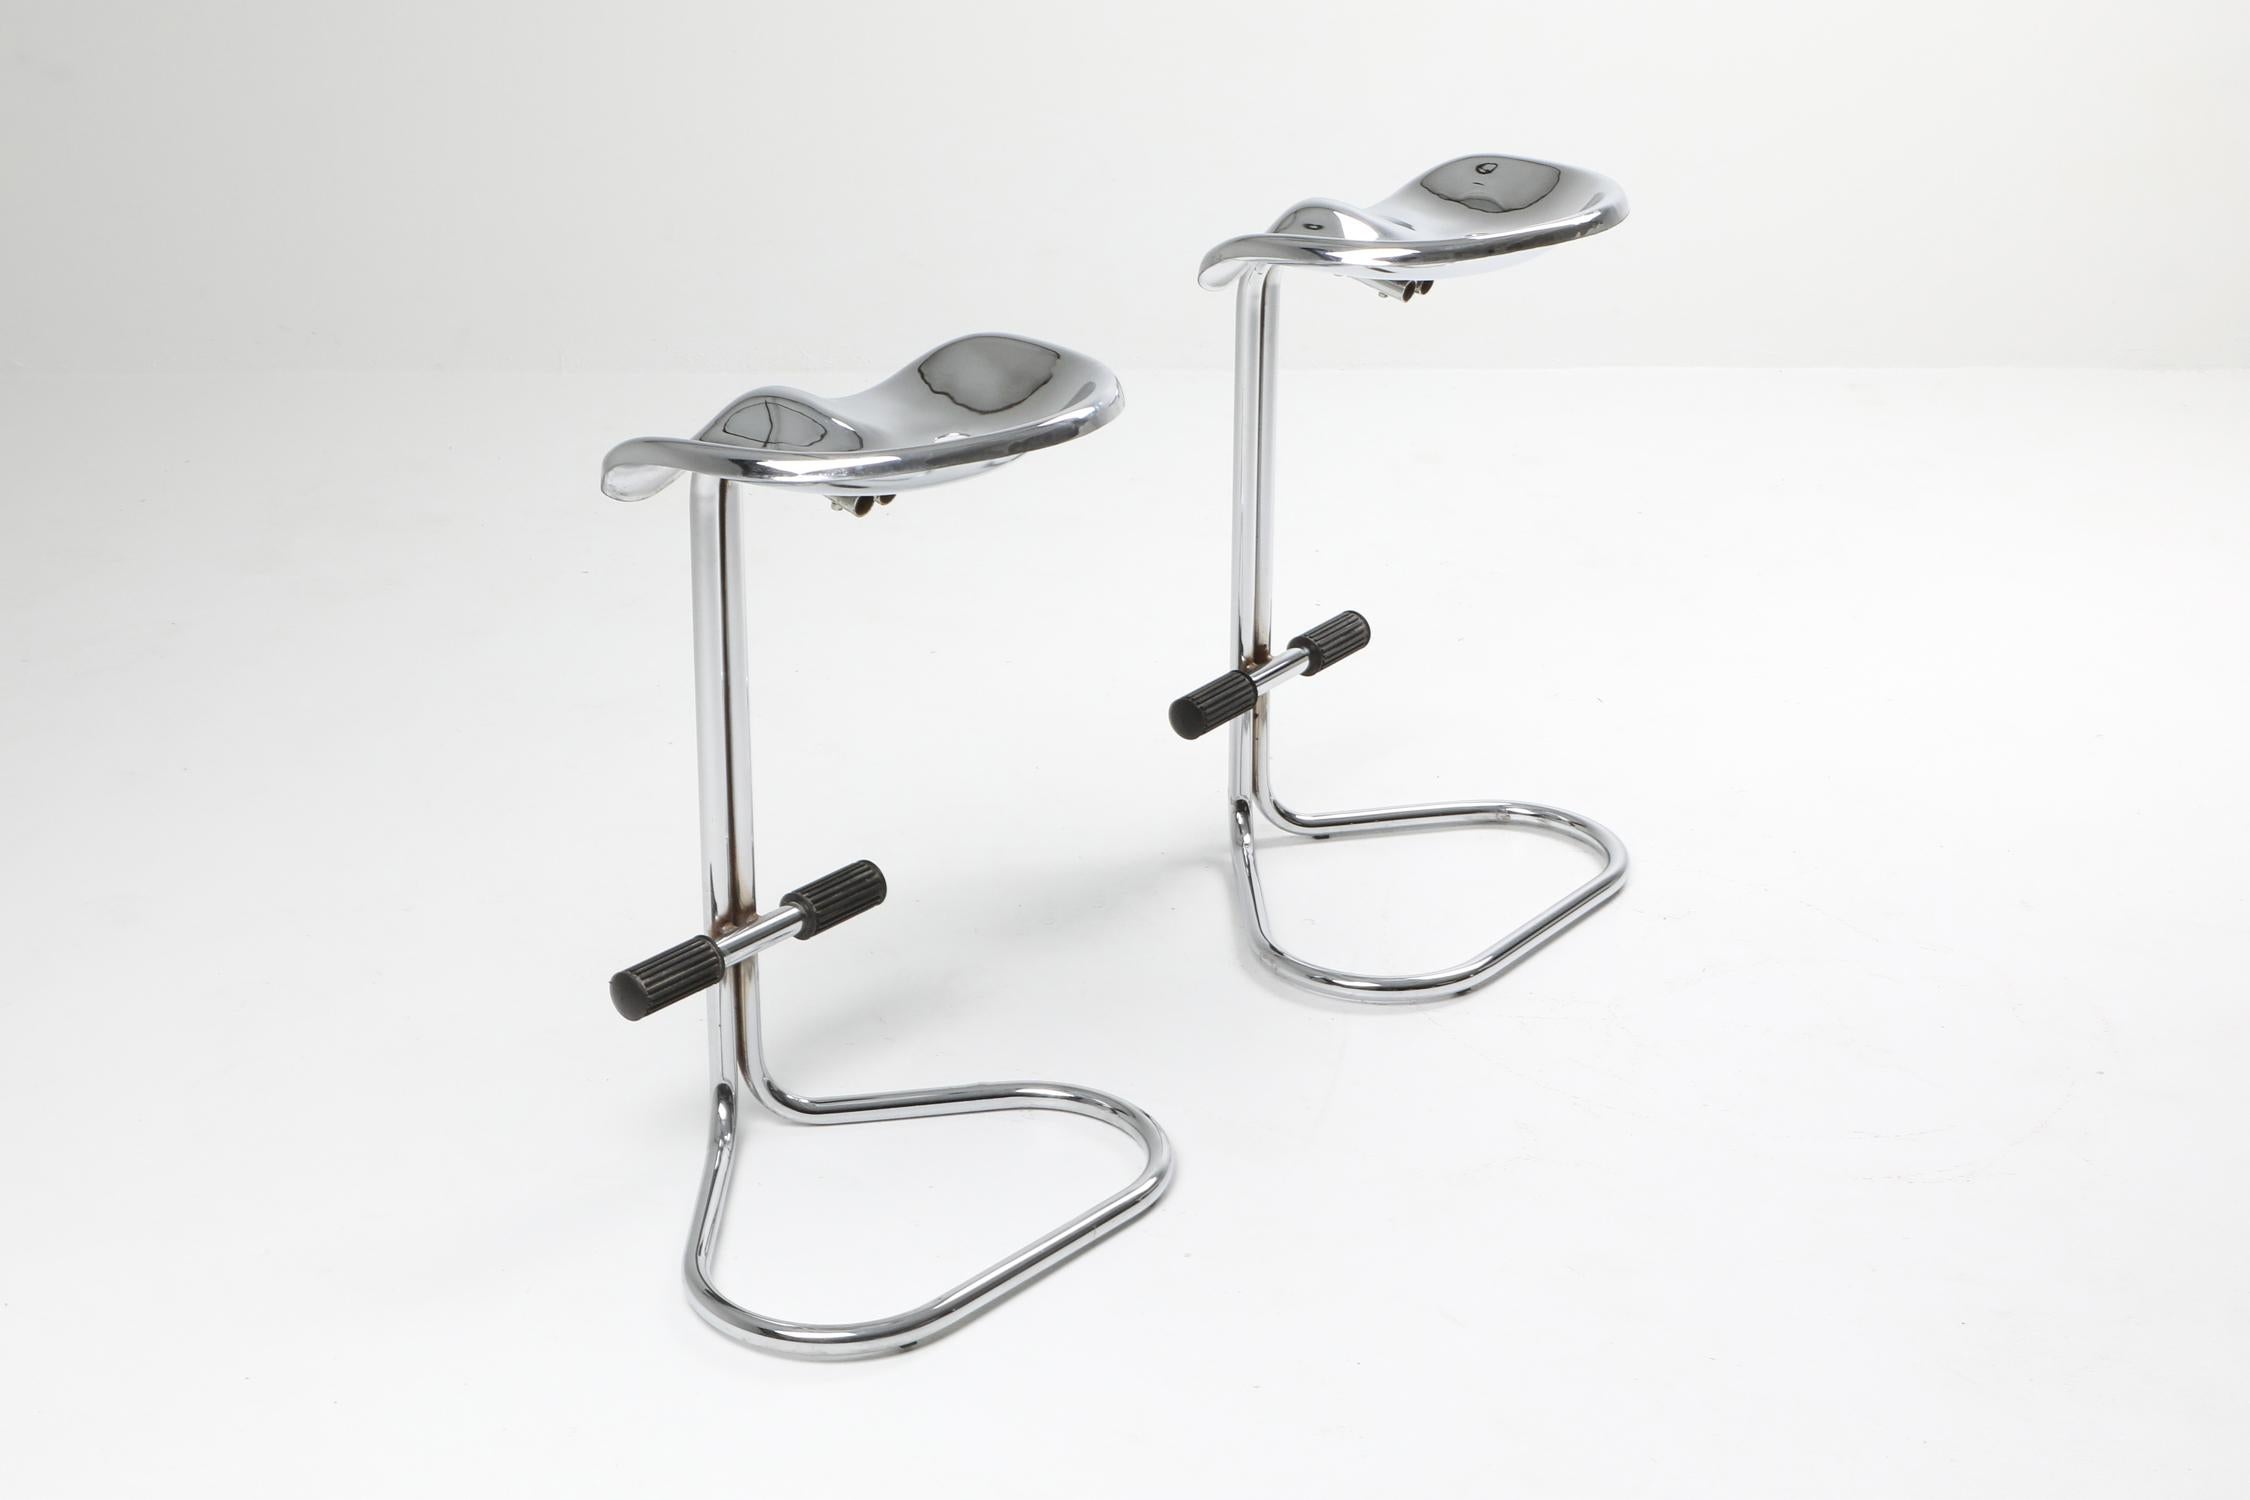 Chrome Tractor Stools by Rodney Kinsman for Bieffeplast, Italy, 1970s For Sale 3